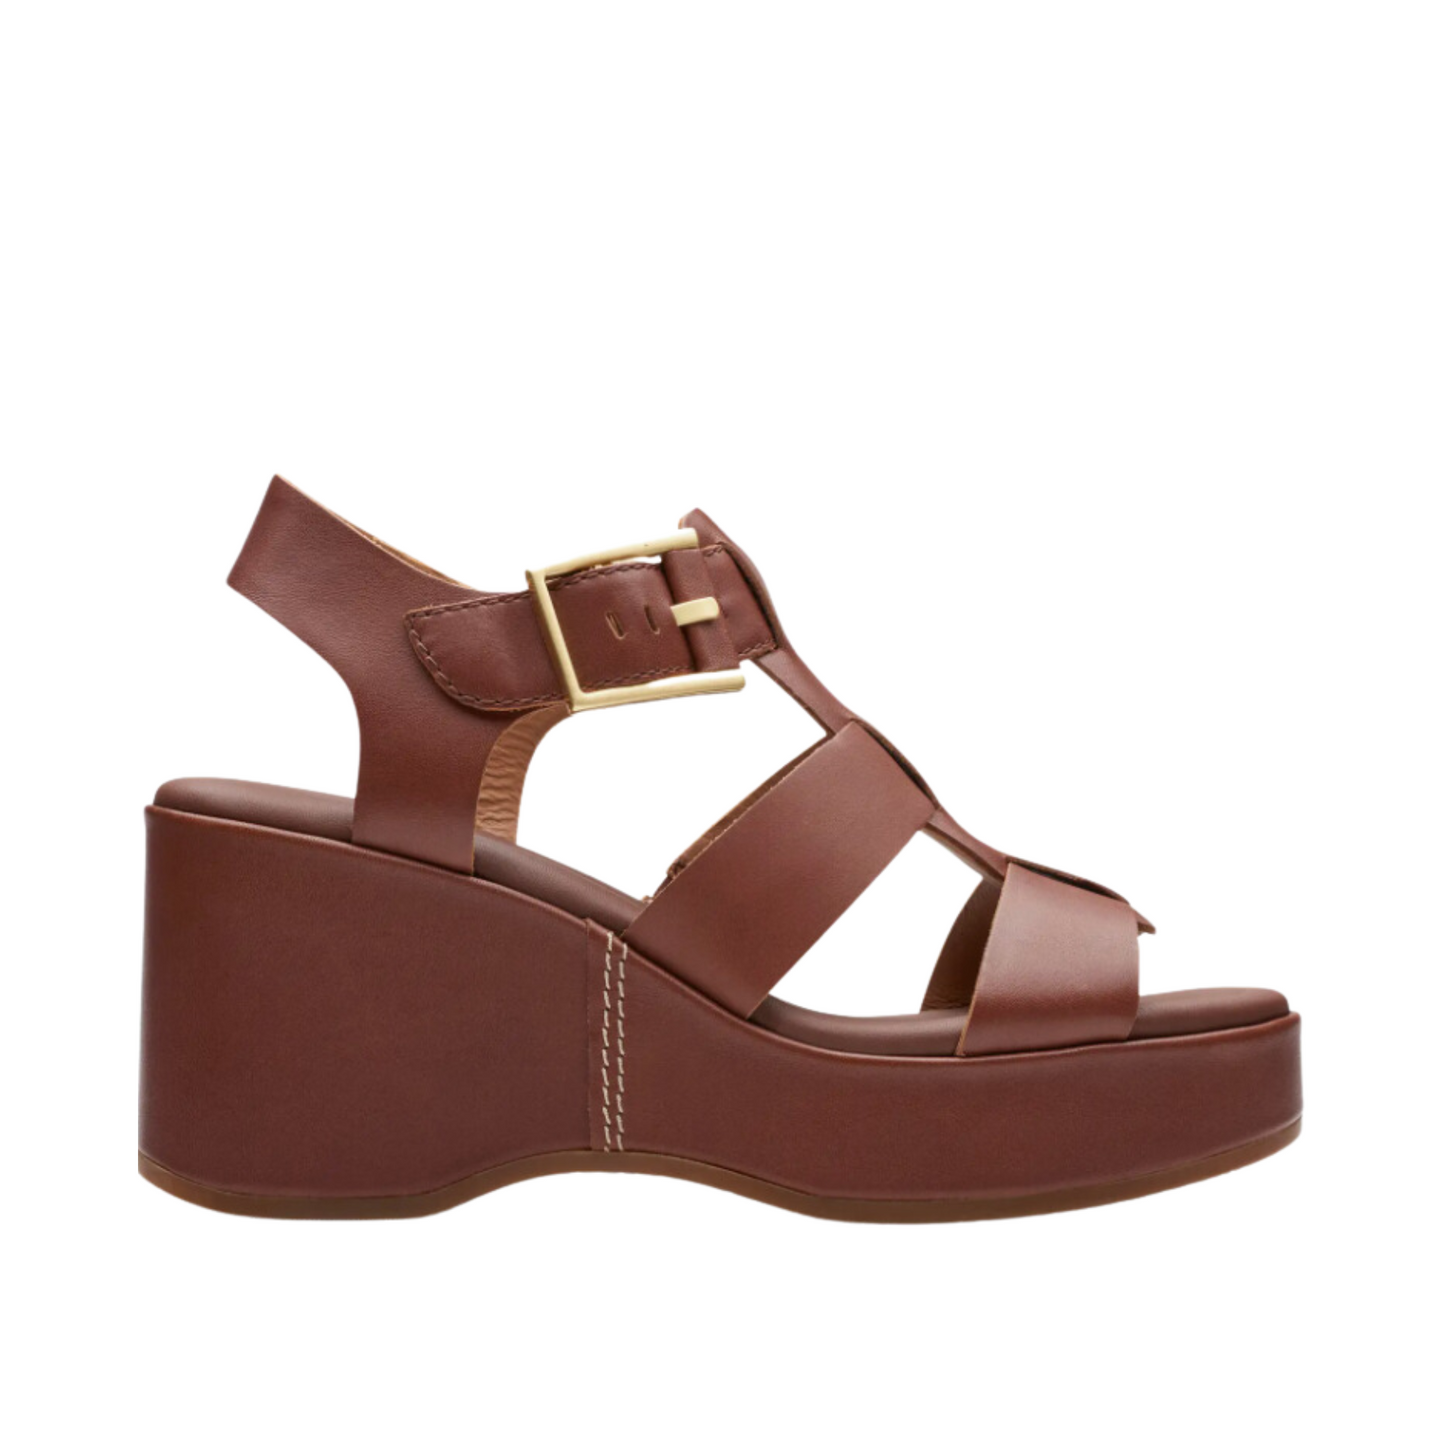 Side view of the  tan leather Manon Cove Wedge Sandals from Clarks